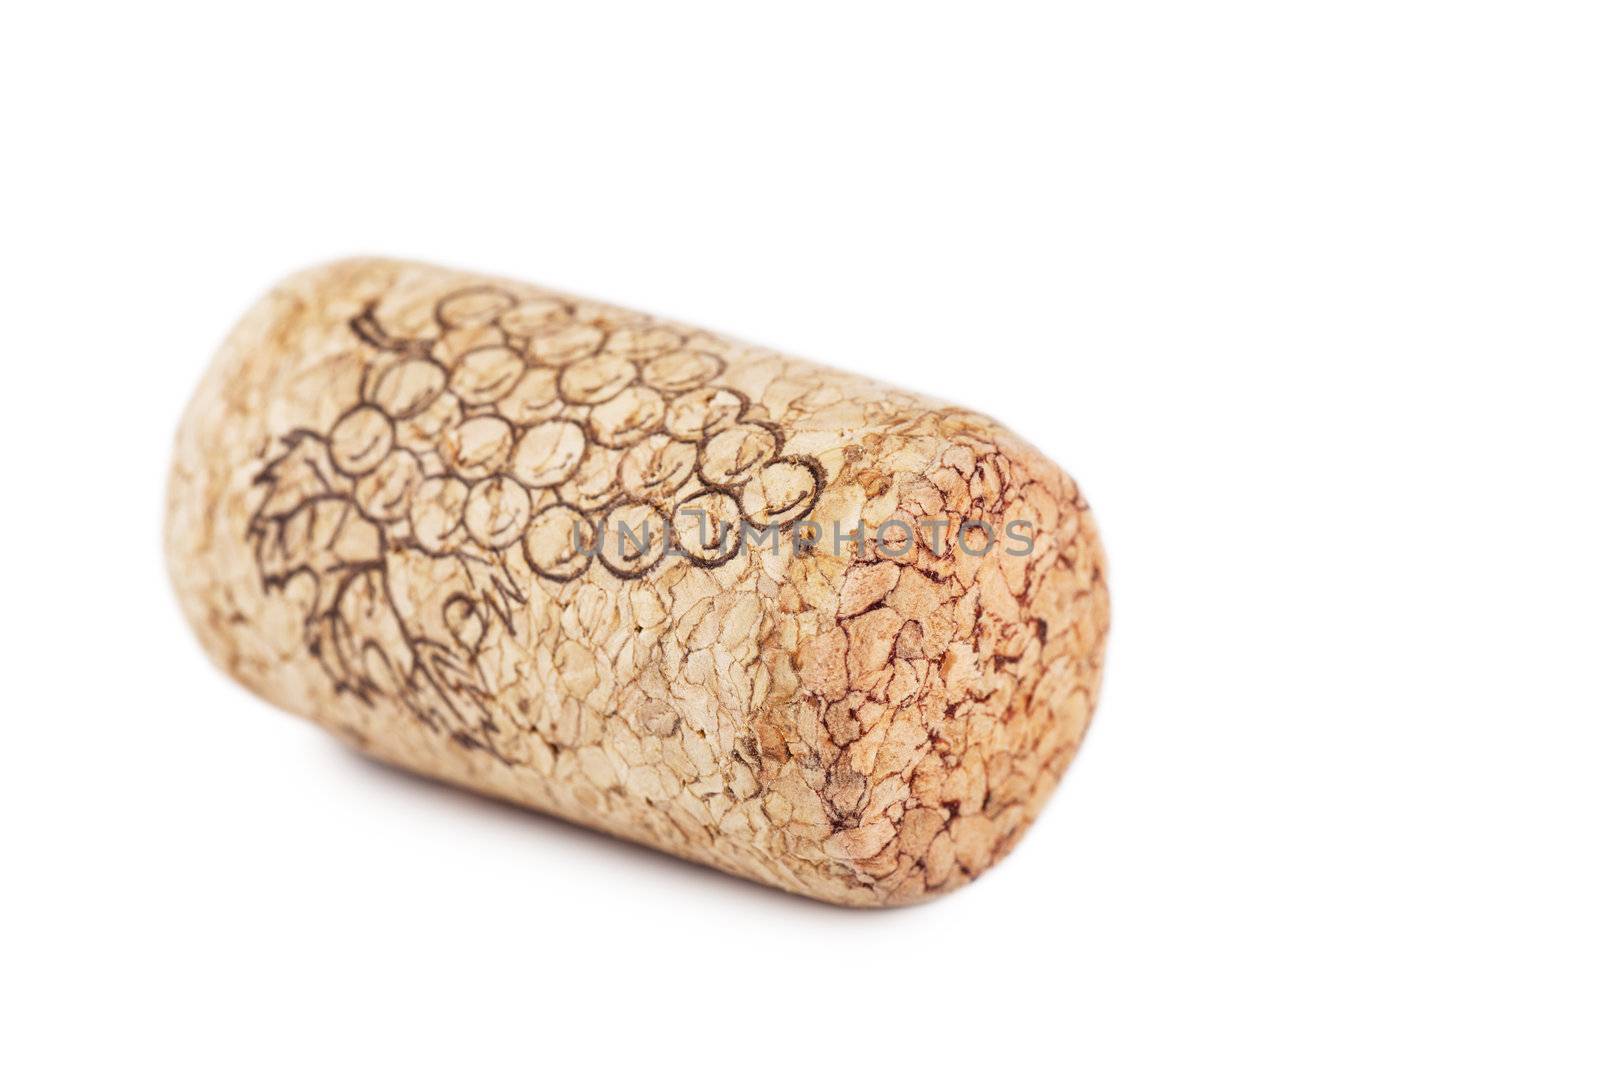 Closeup view of wine cork over white background